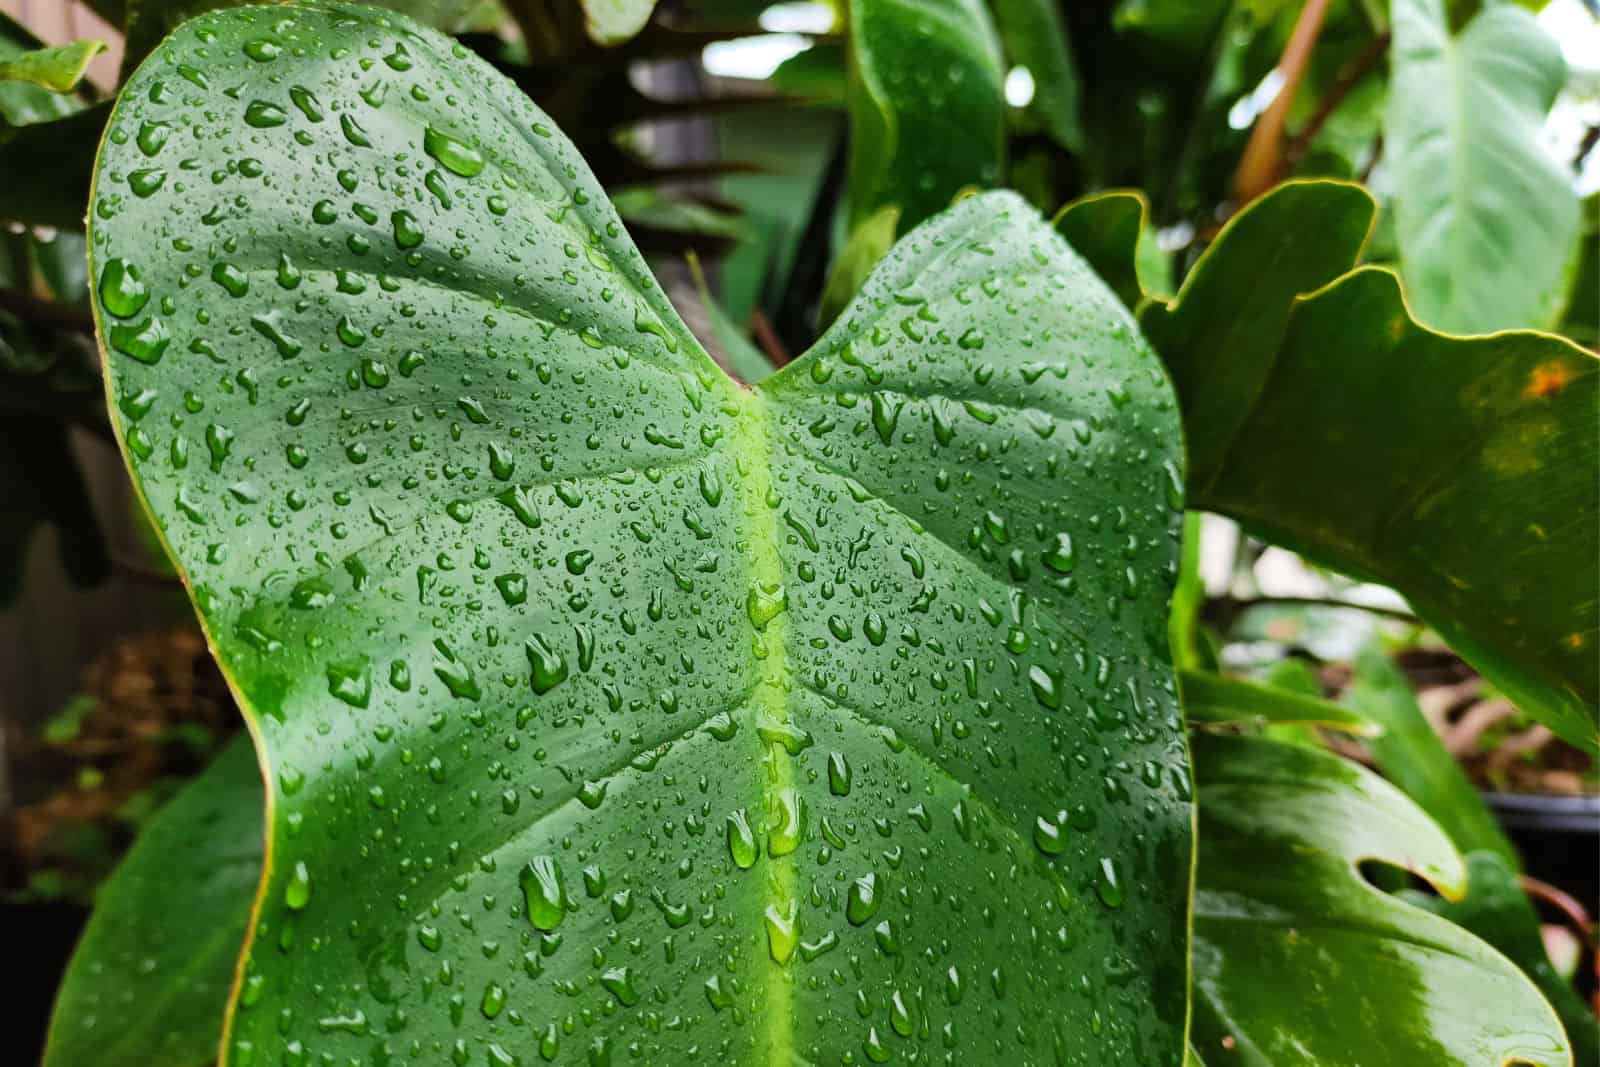 Philodendron rugosum leaf with water droplets